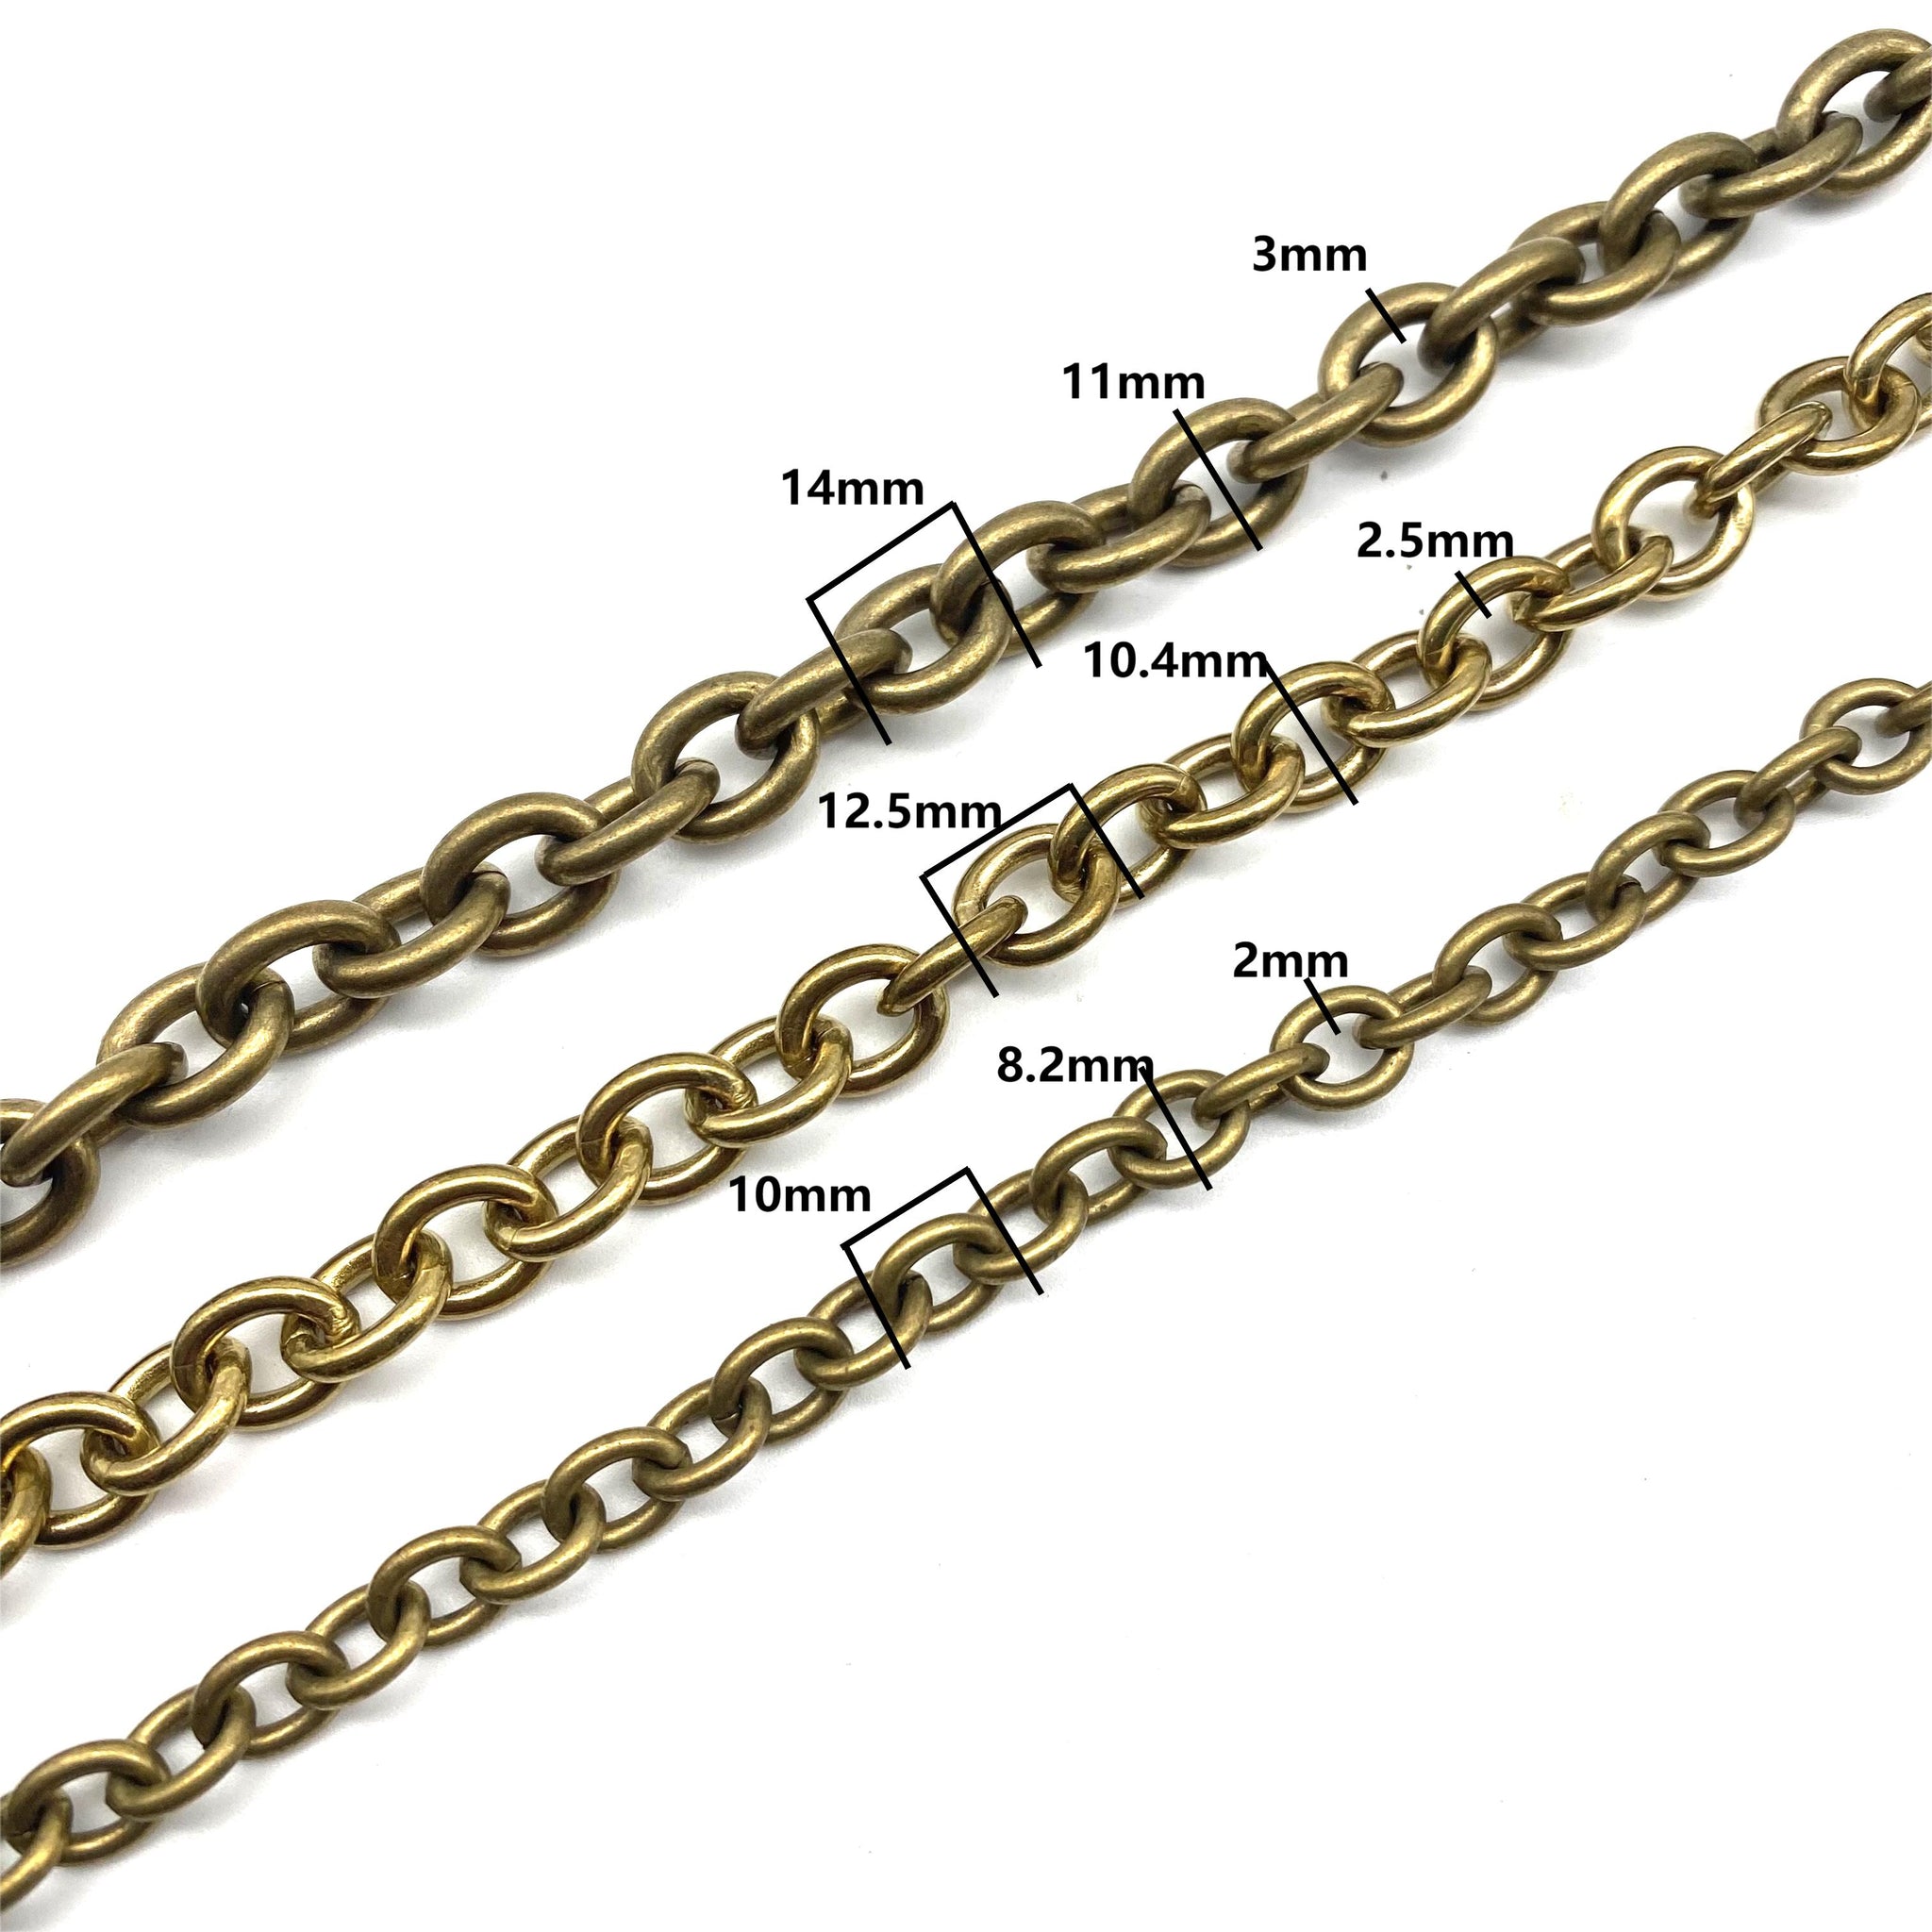 Heavy duty Solid Brass Wallet Chain Hand craft chain Pants Fob